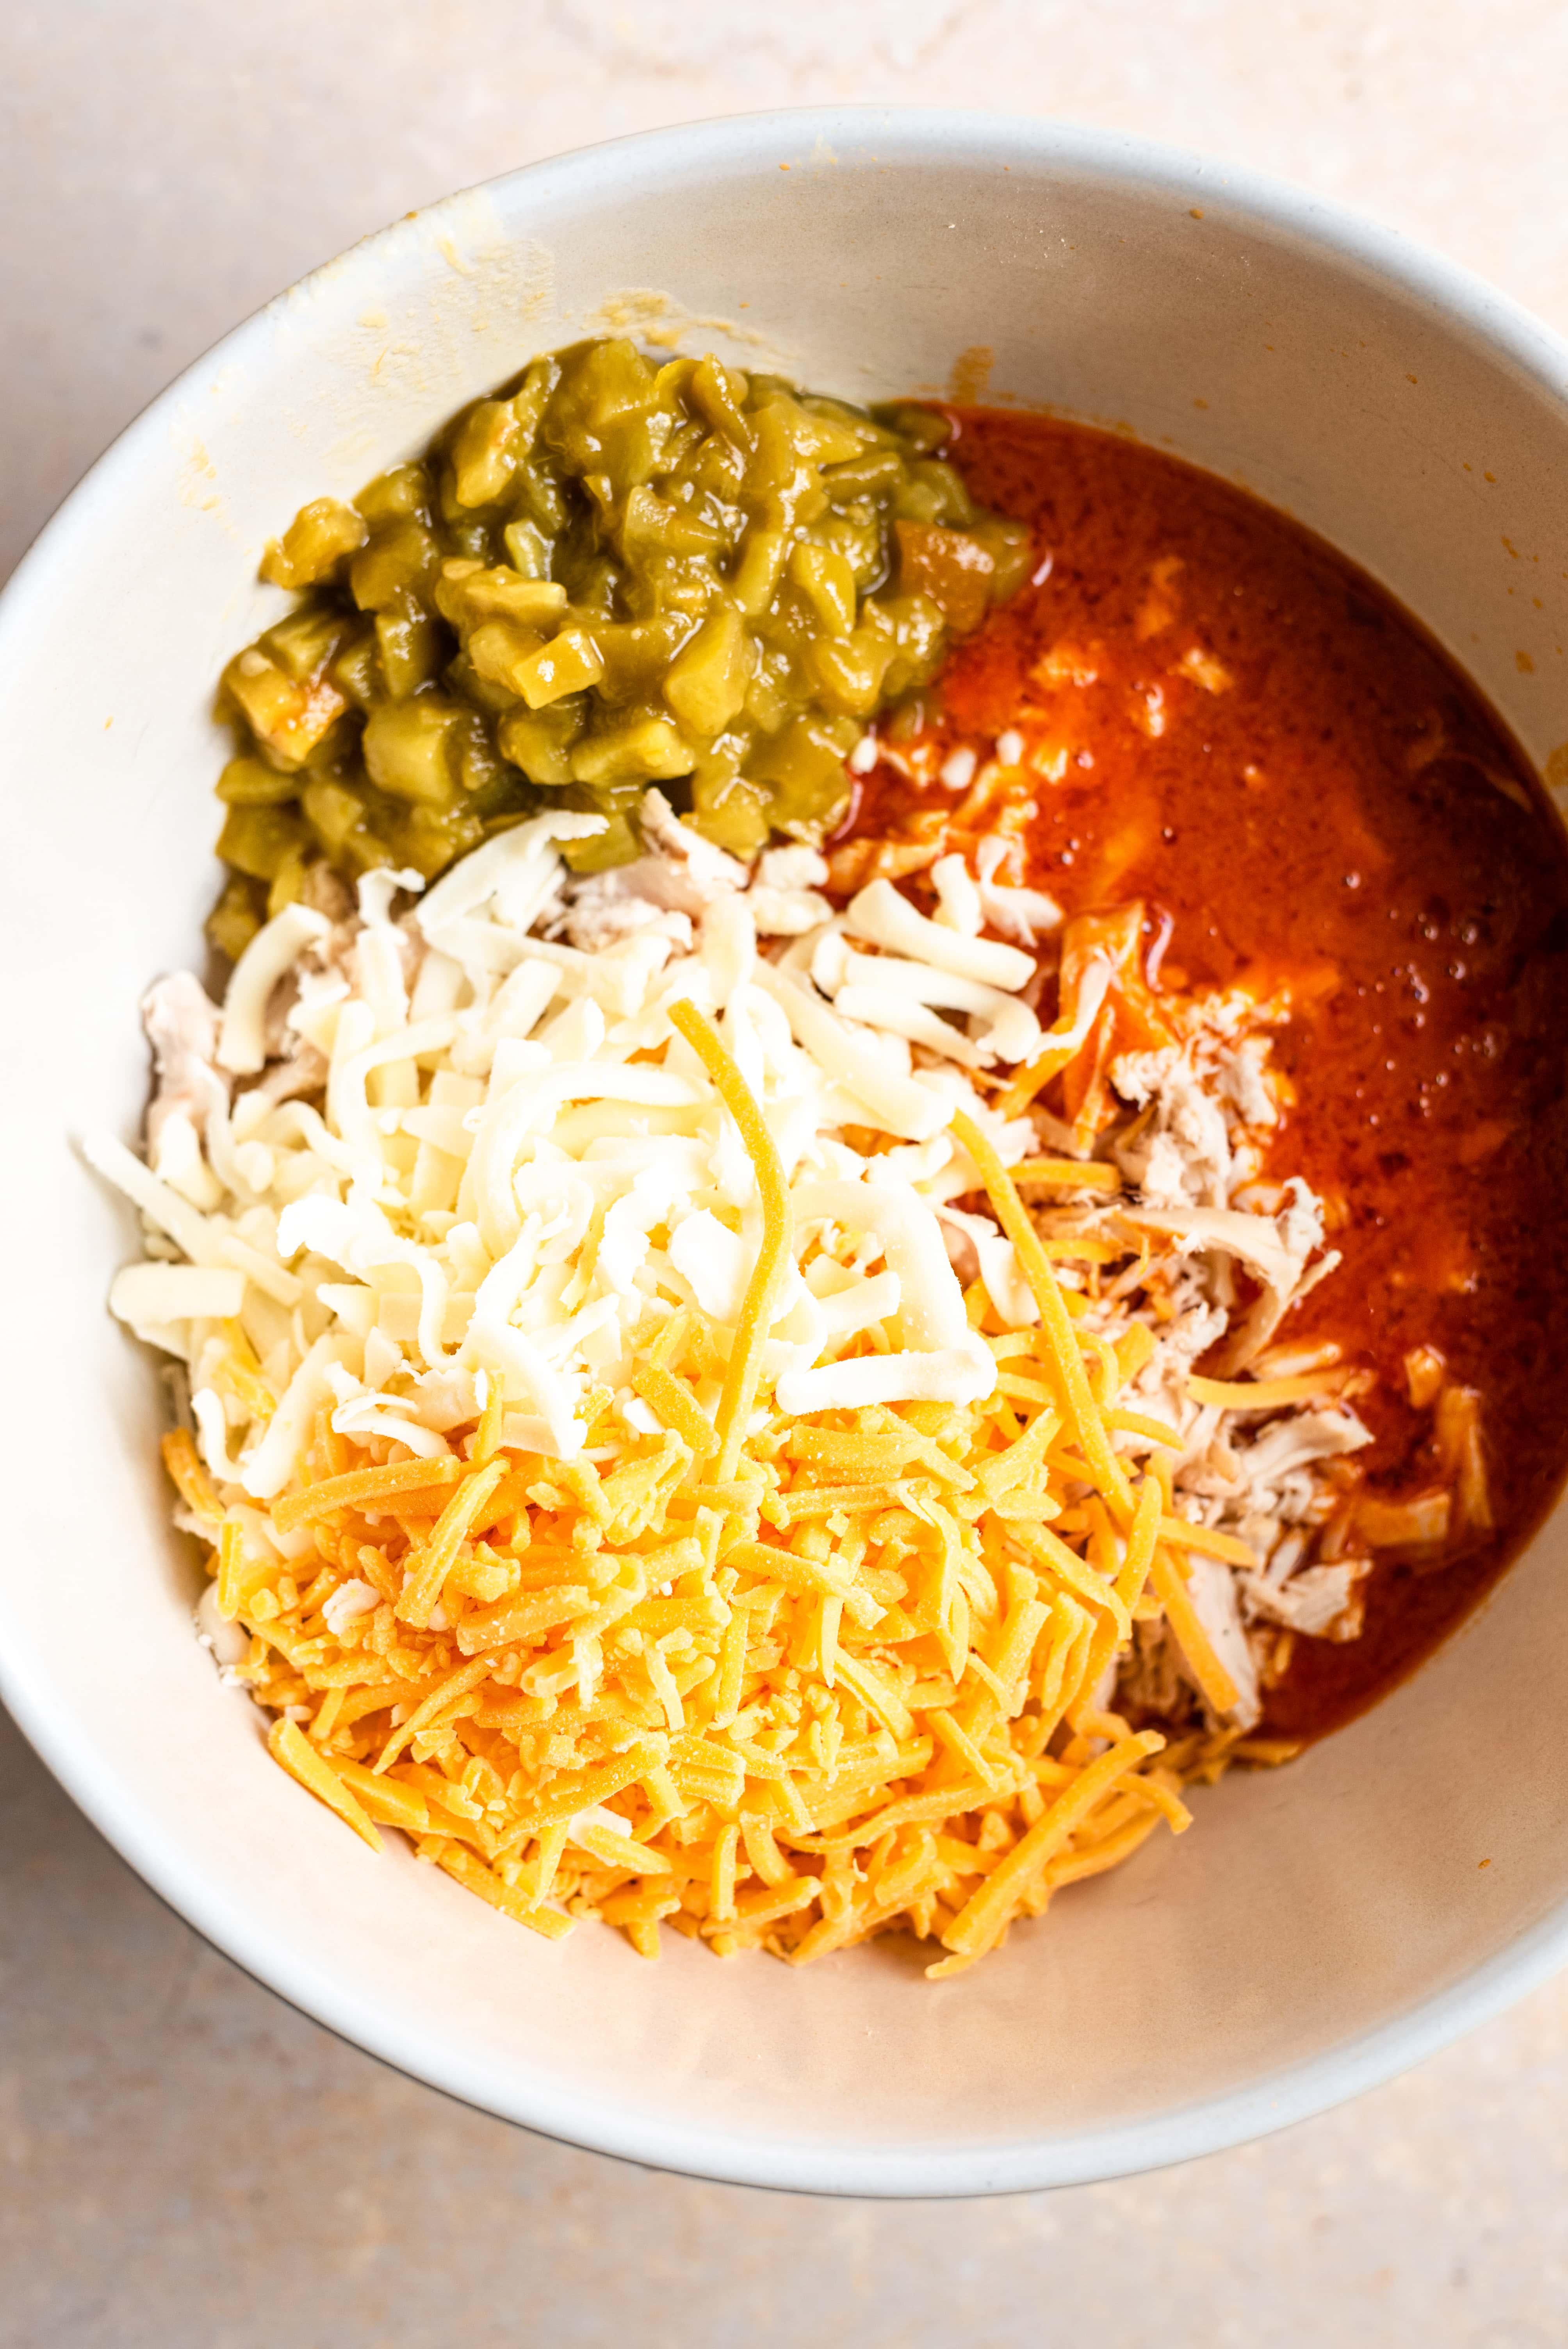 The buffalo sauce, chiles, and cheeses have been added to the bowl with the chicken.